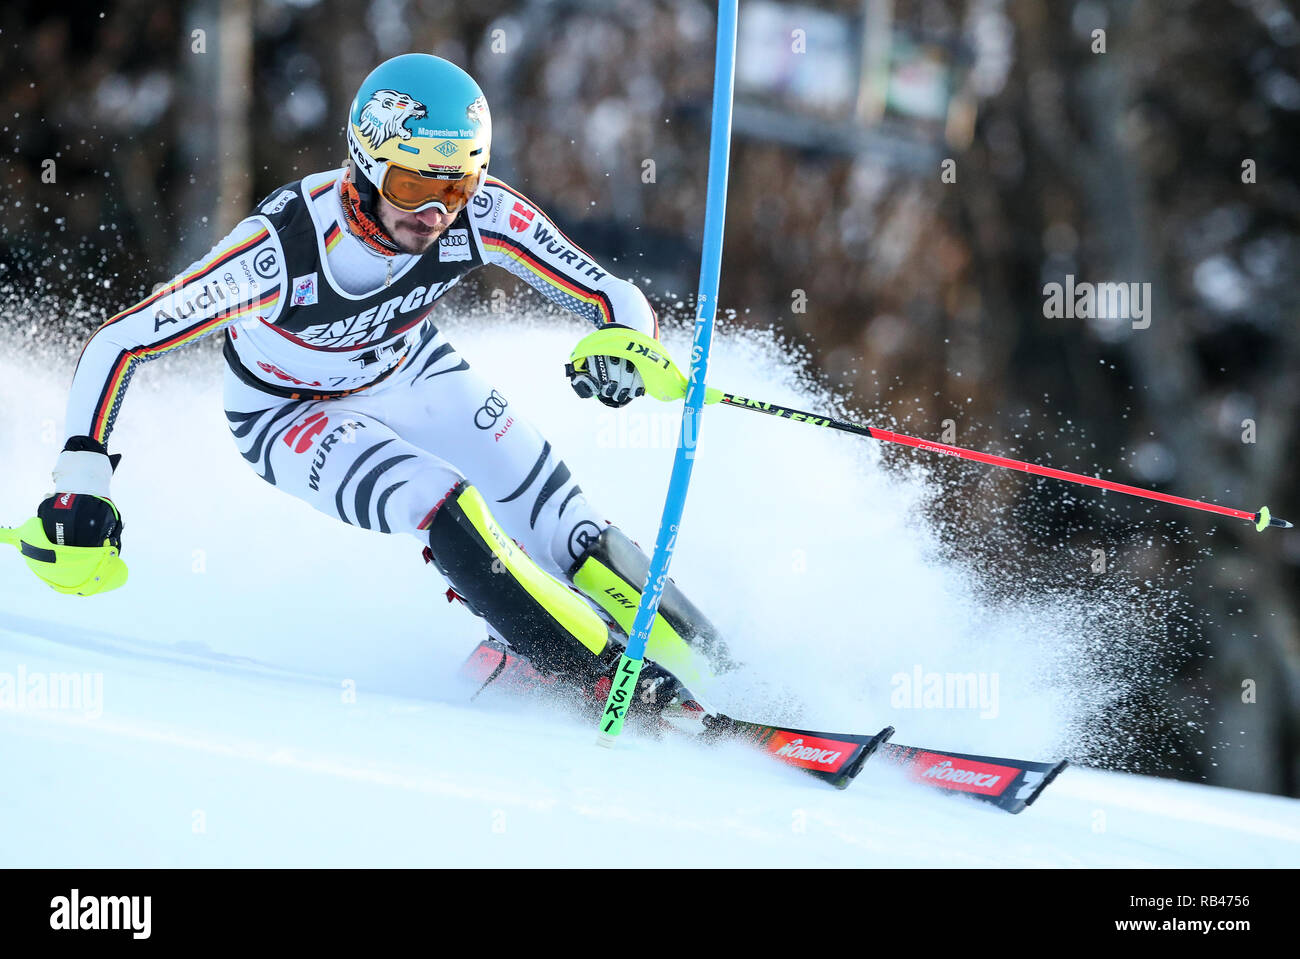 Zagreb, Croatia. 6th Jan, 2019. Felix Neureuther of Germany competes during the men's slalom race of FIS Ski World Cup Snow Queen Trophy 2019 in Zagreb, Croatia, Jan. 6, 2019. Credit: Sanjin Strukic/Xinhua/Alamy Live News Stock Photo